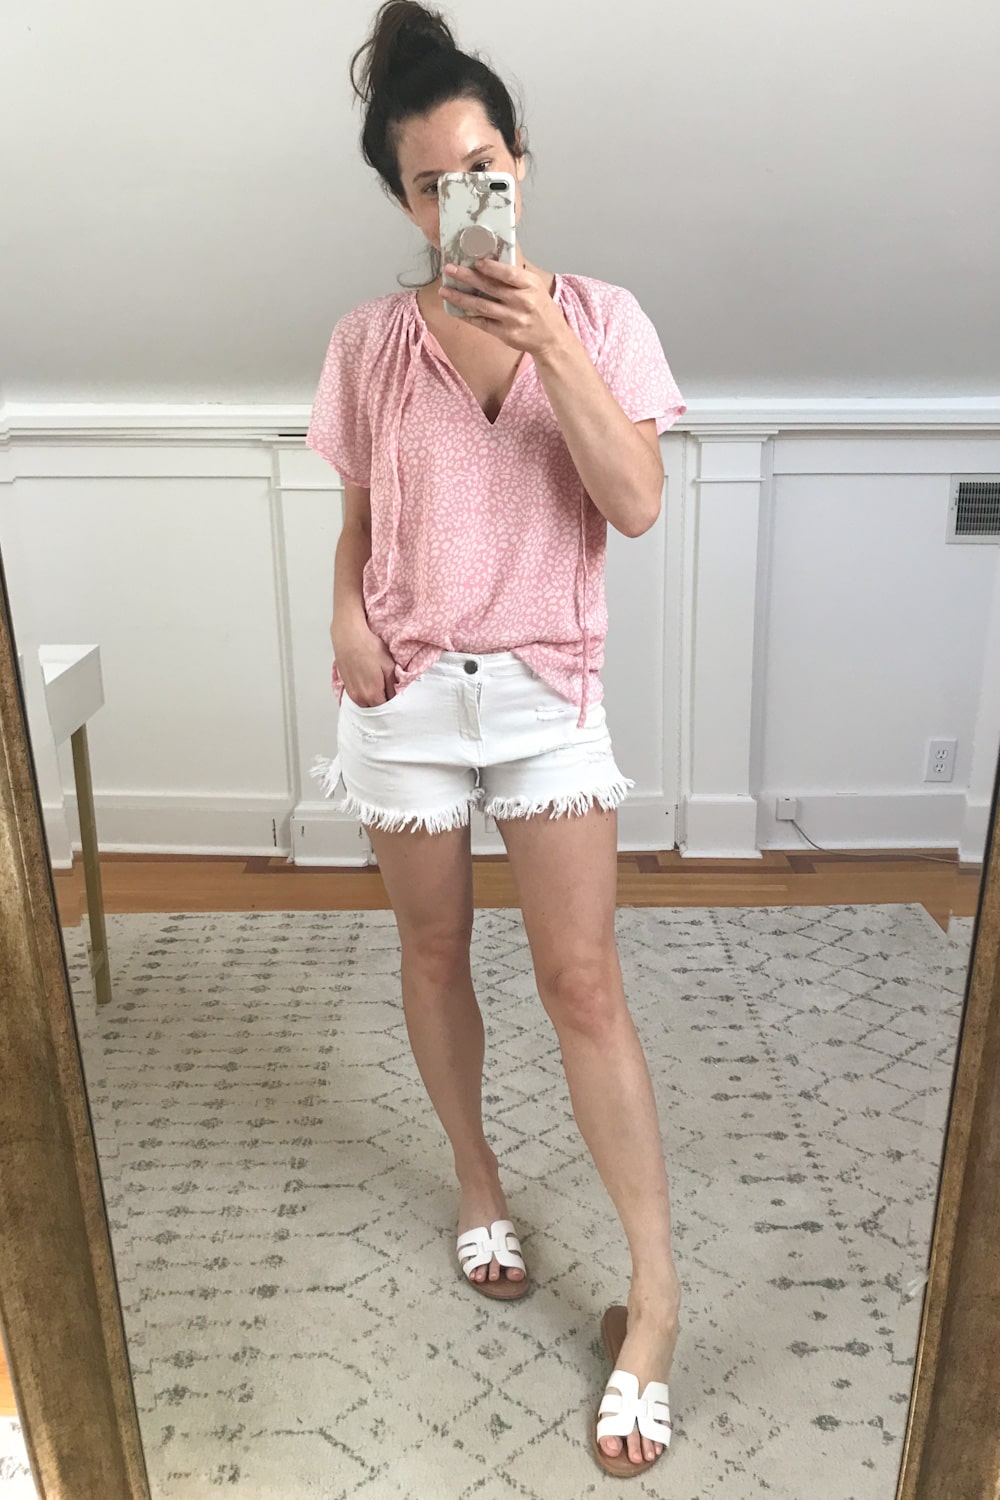 Affordable fashion blogger Stephanie Ziajka tries on an Amazon pink v-neck chiffon top as part of her honeymoon Amazon Fashion haul on Diary of a Debutante